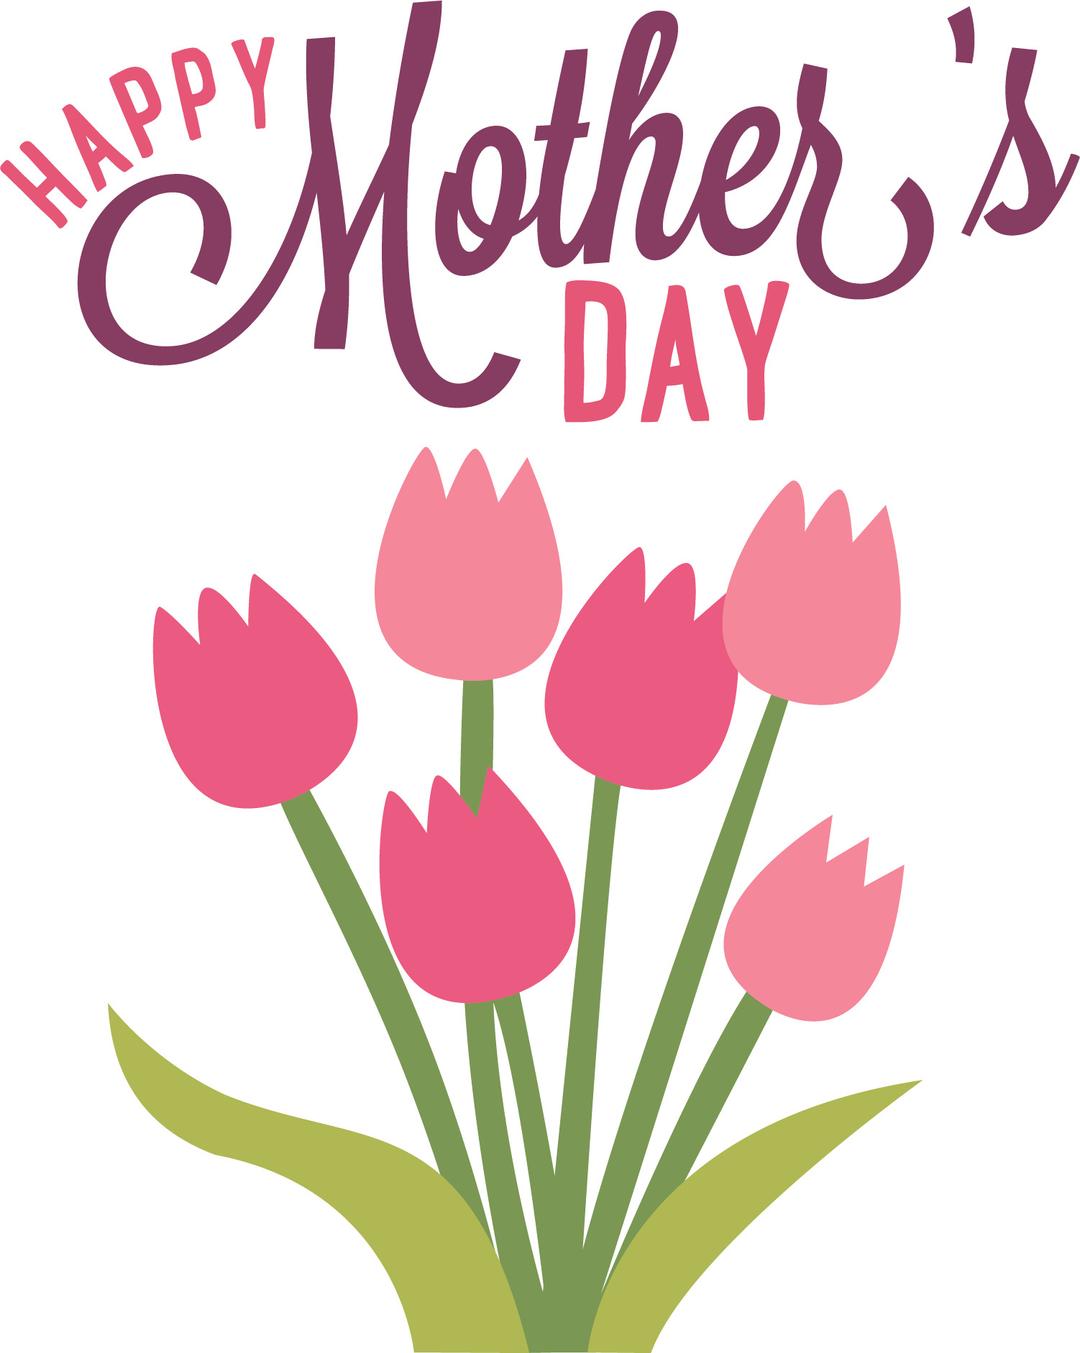 Happy Mothers Day Flowers png transparent